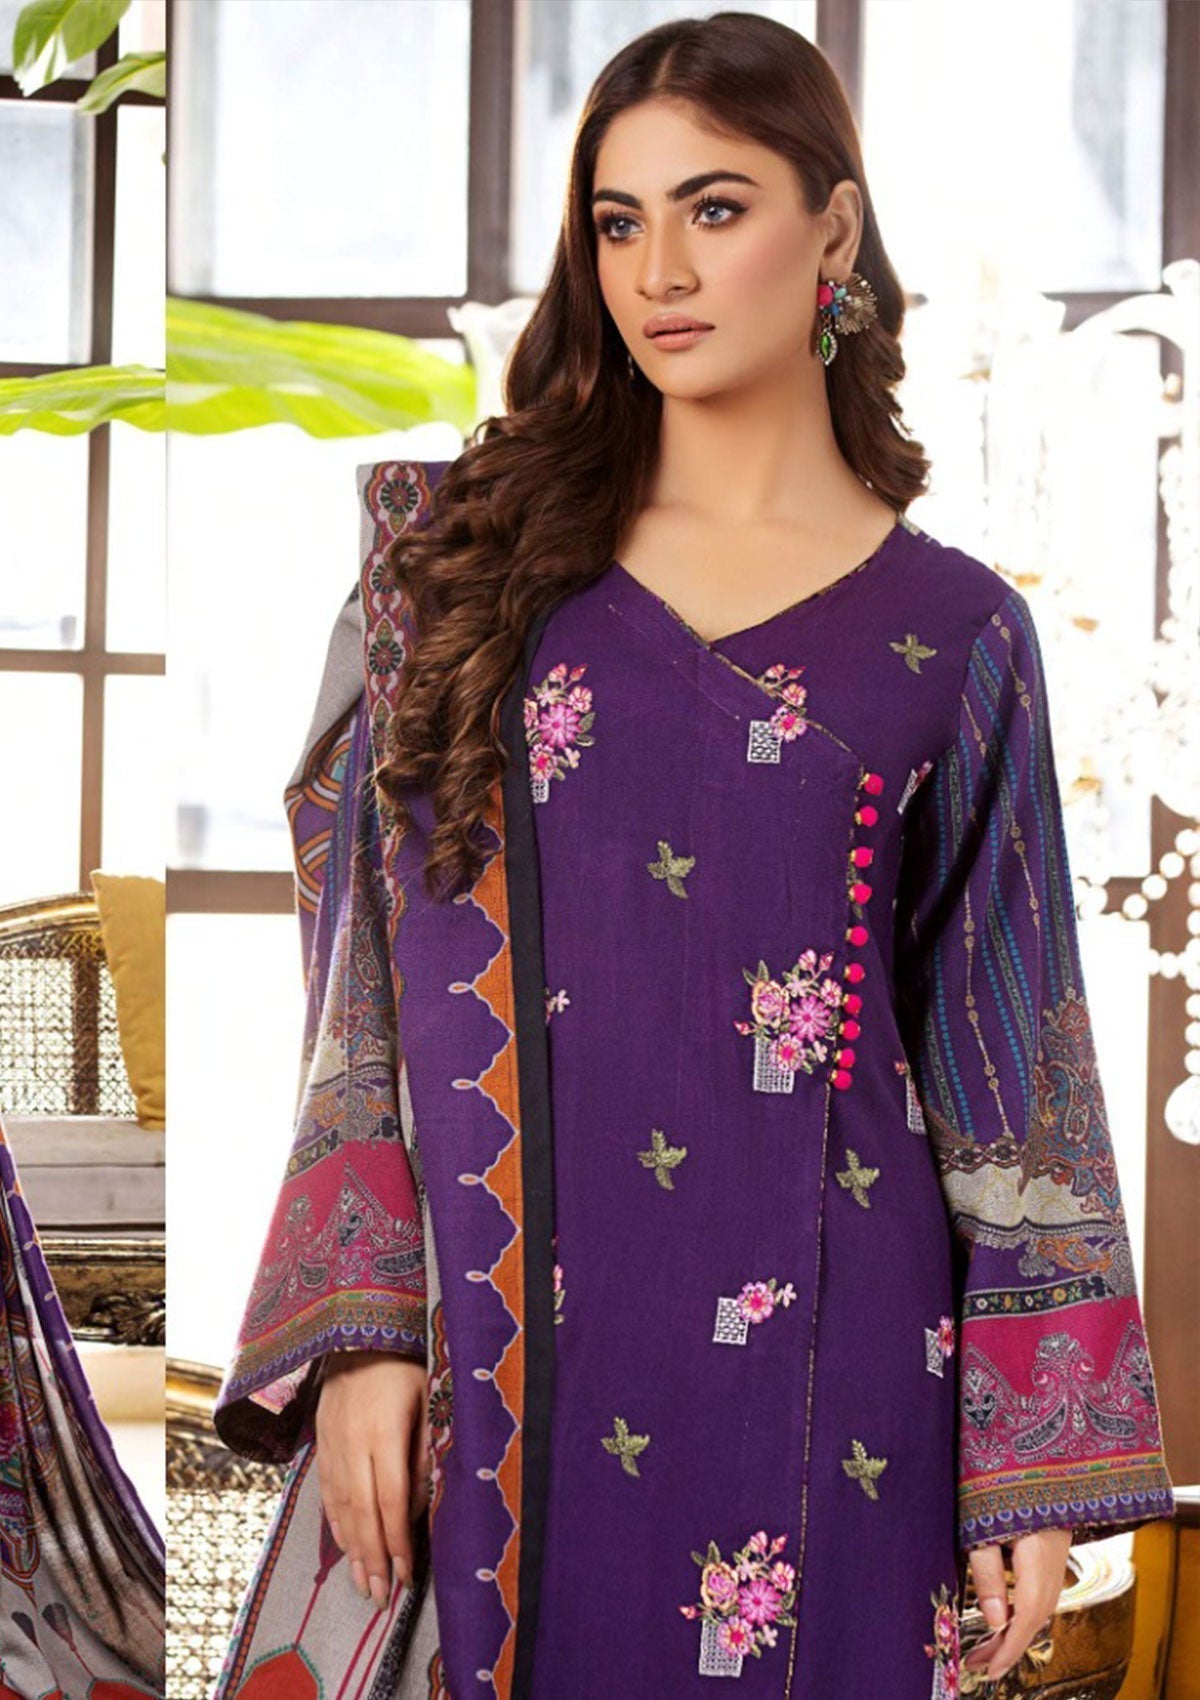 Winter Collection - Noor Jahan - Mina Hassan - D#8 available at Saleem Fabrics Traditions